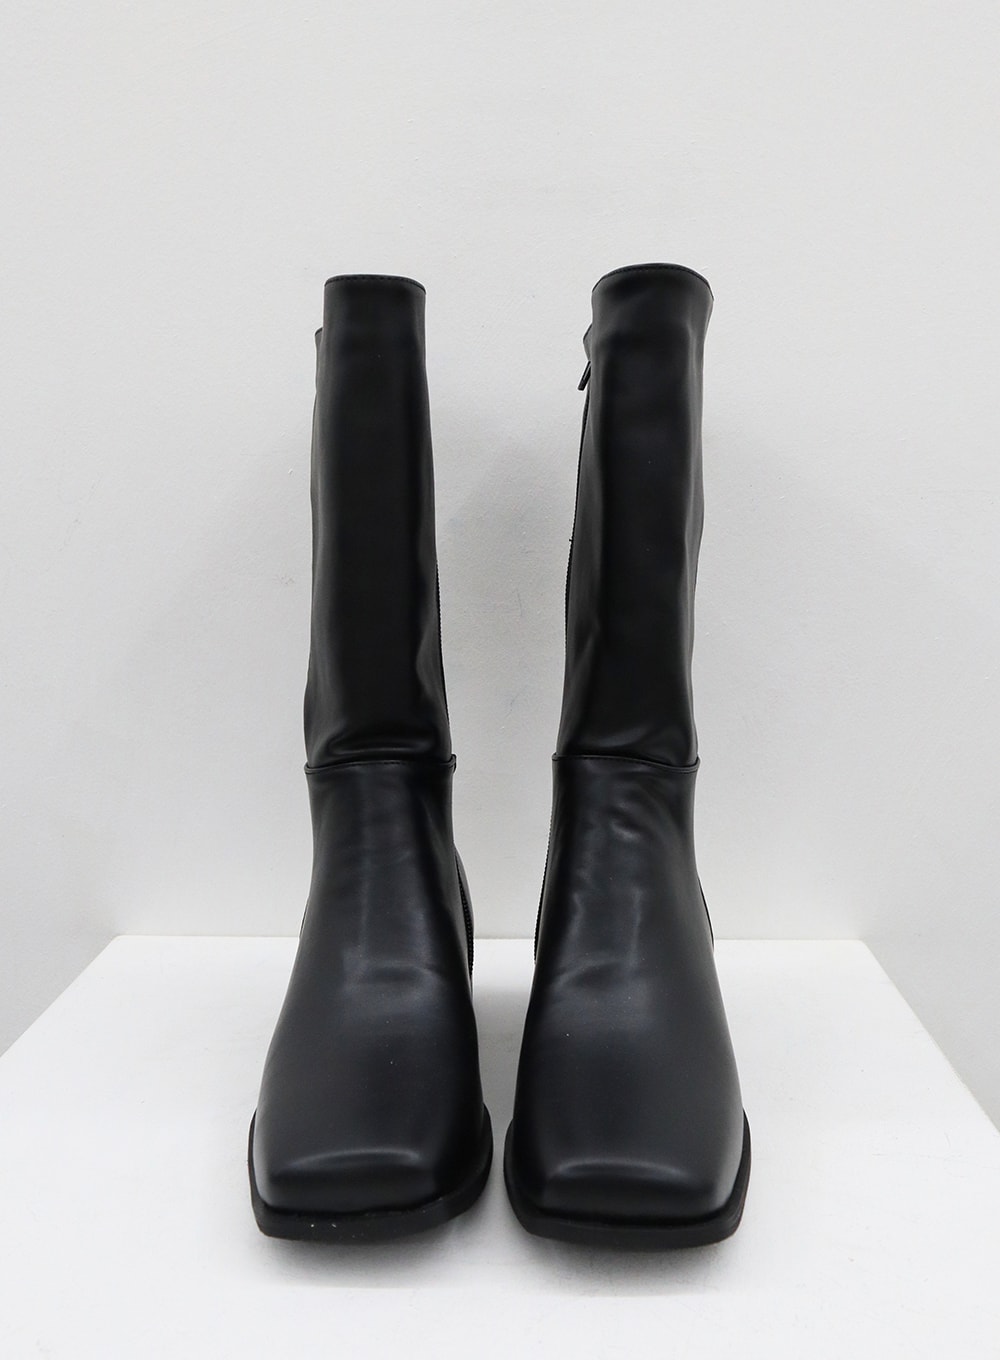 Charleigh Black Square Toe Mid-Calf Boots